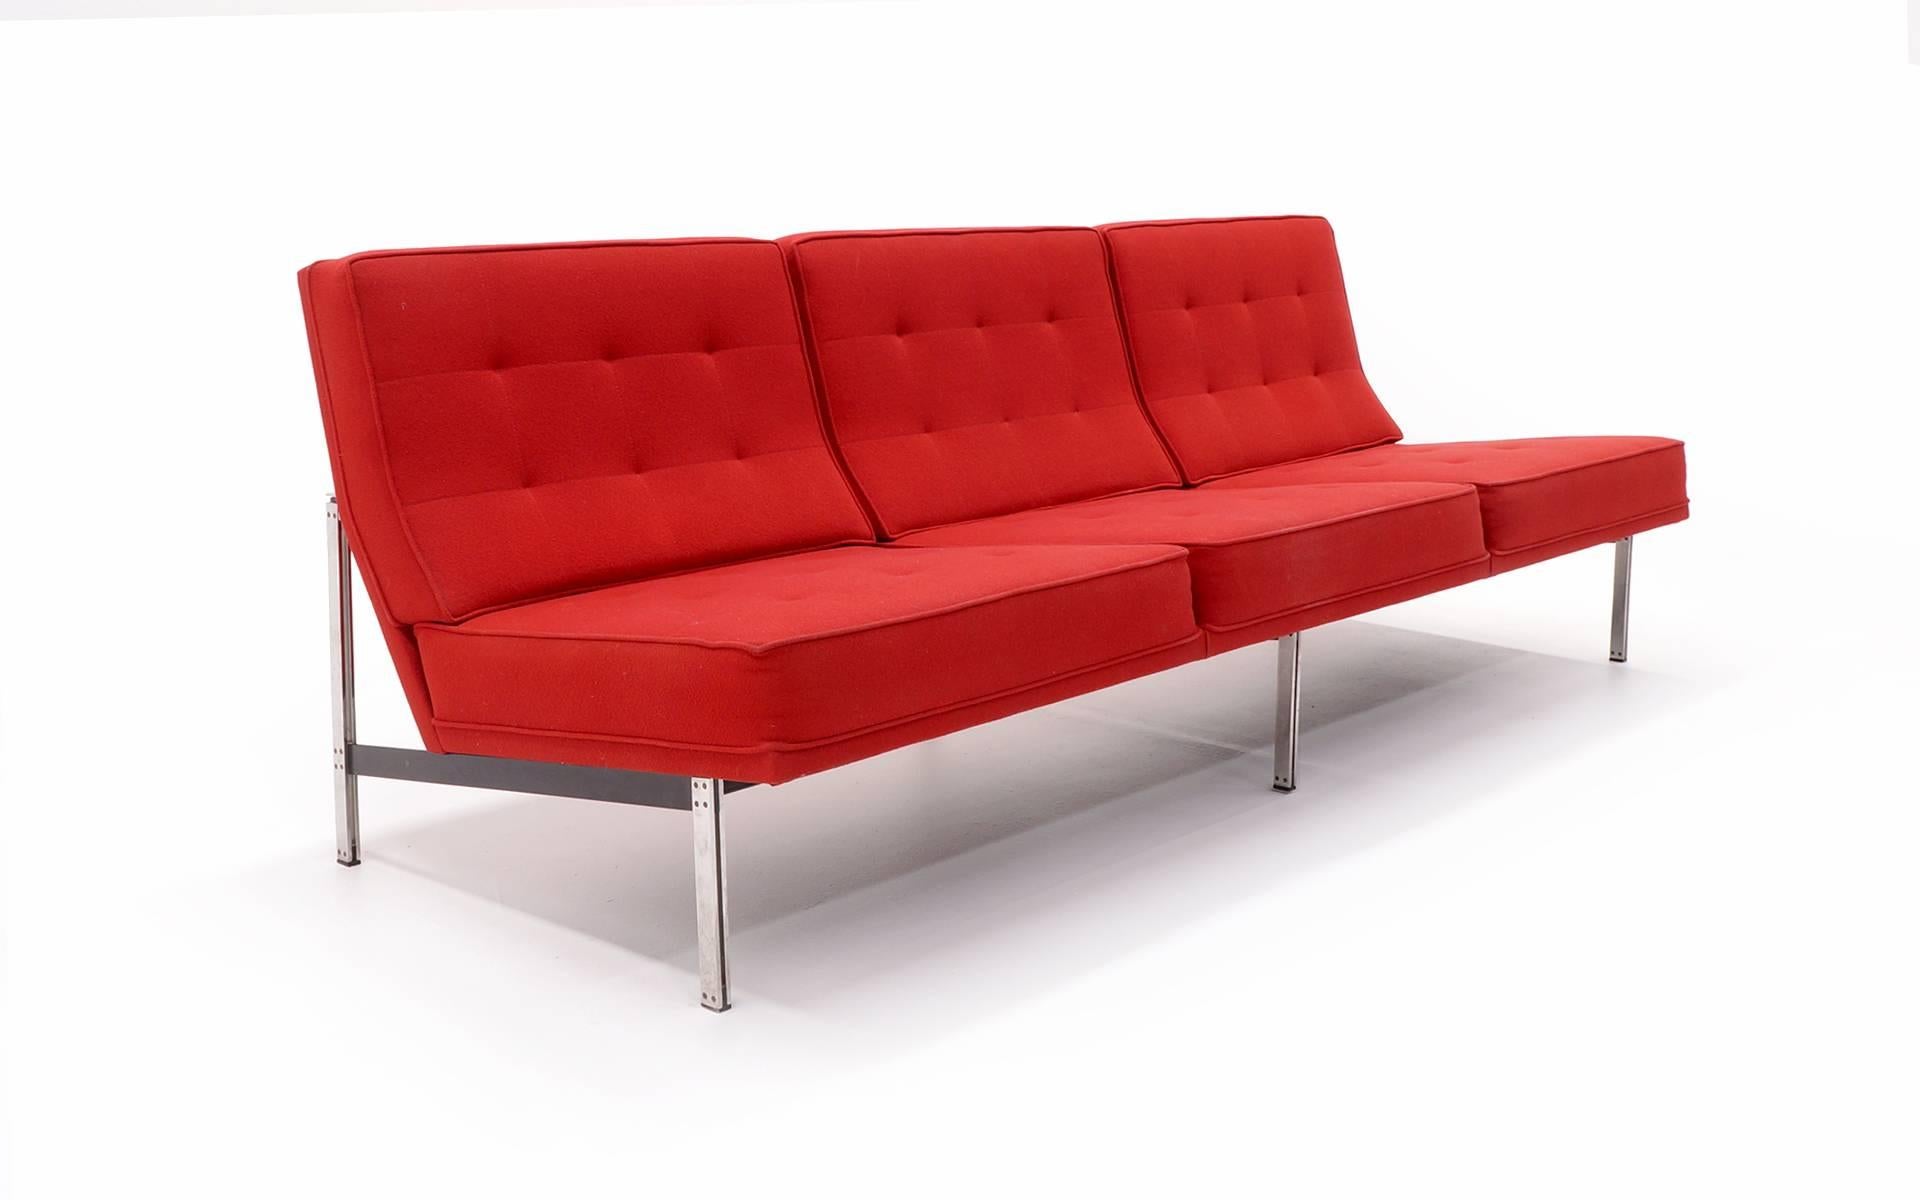 Florence knoll three-seat parallel bar sofa without arms. Newer, striking red wool fabric. Very good condition.